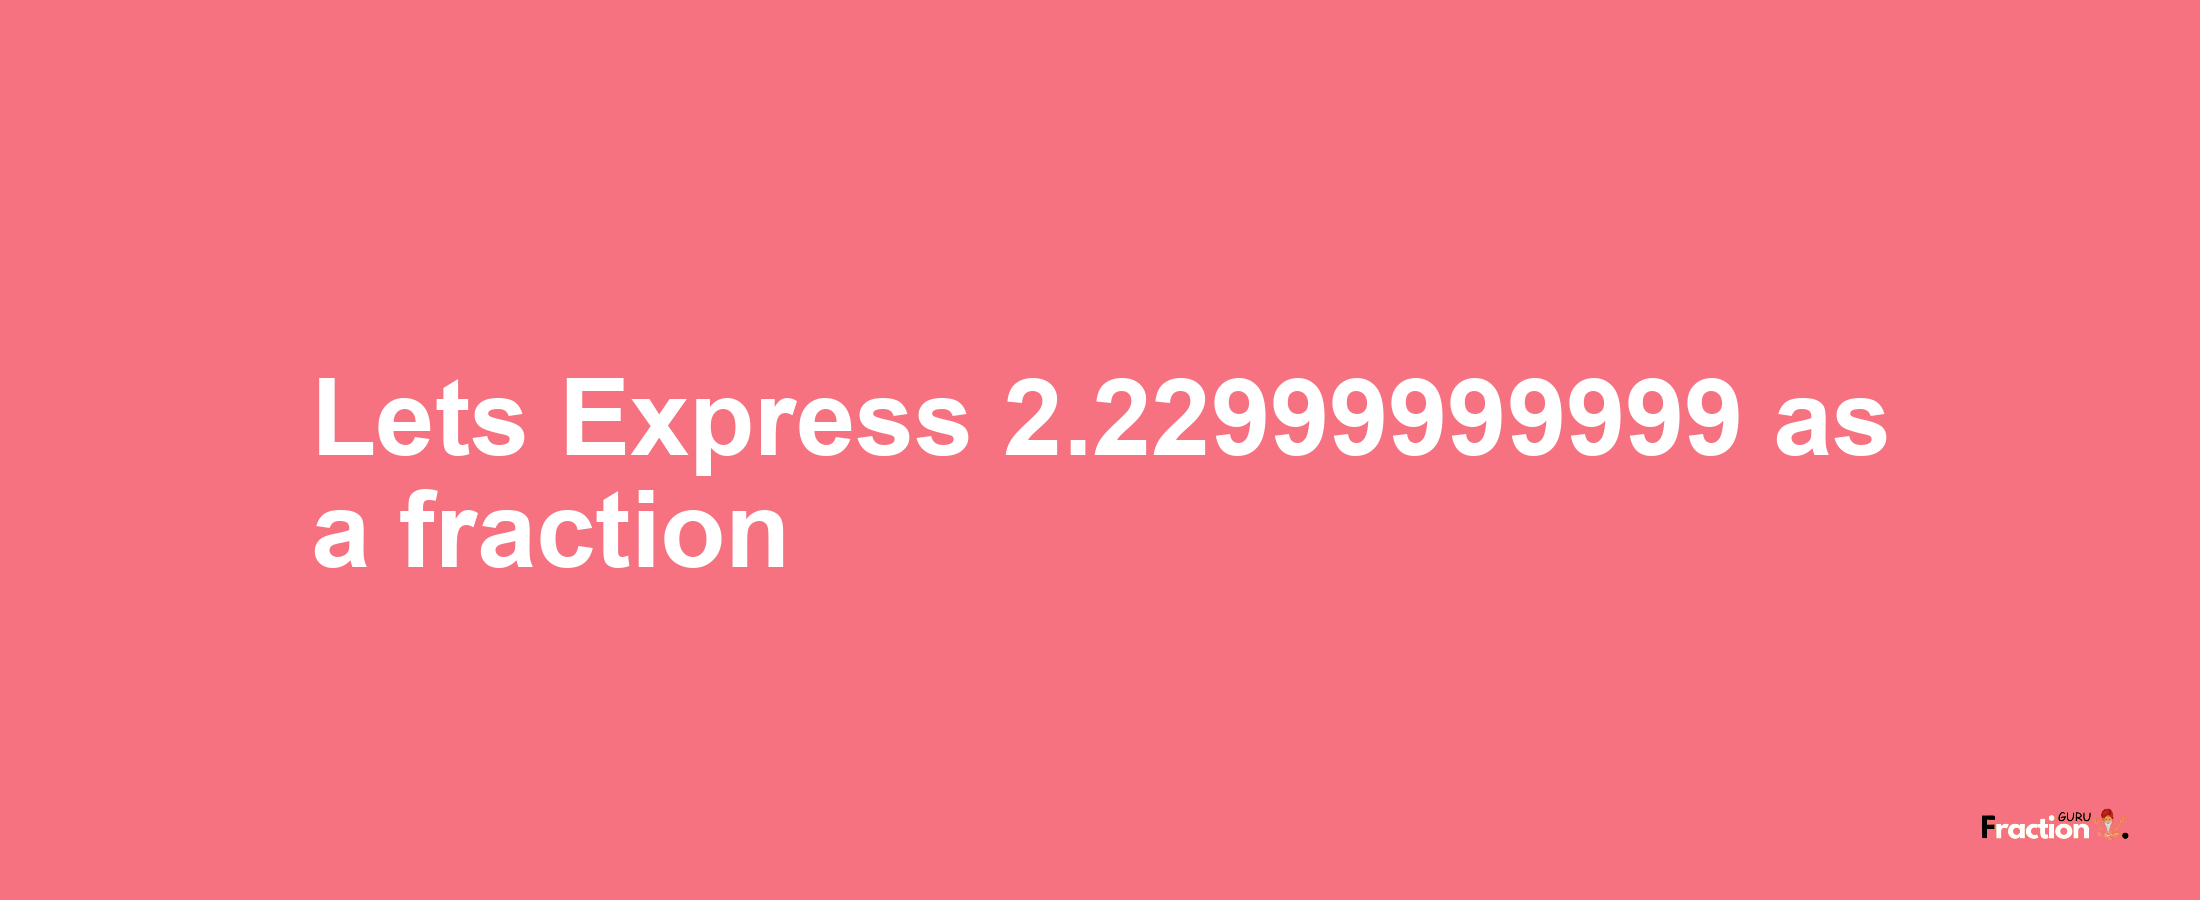 Lets Express 2.22999999999 as afraction